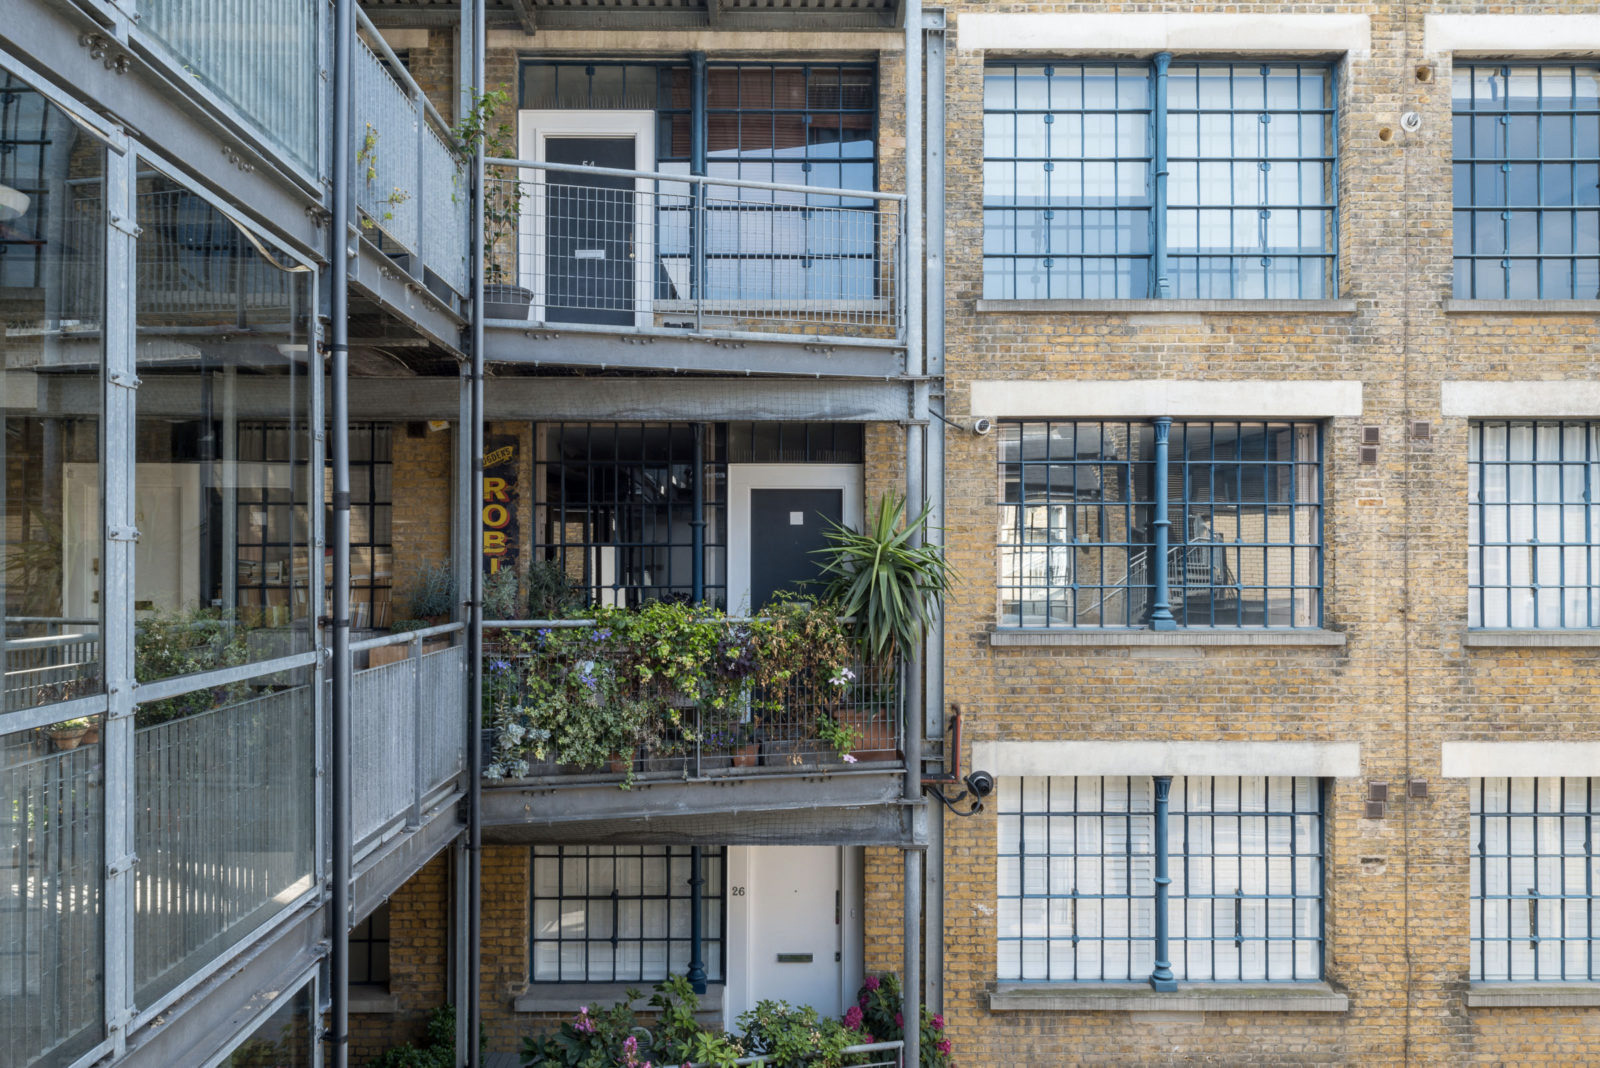 Industrial windows steal the show inside this London loft - for sale via The Modern House